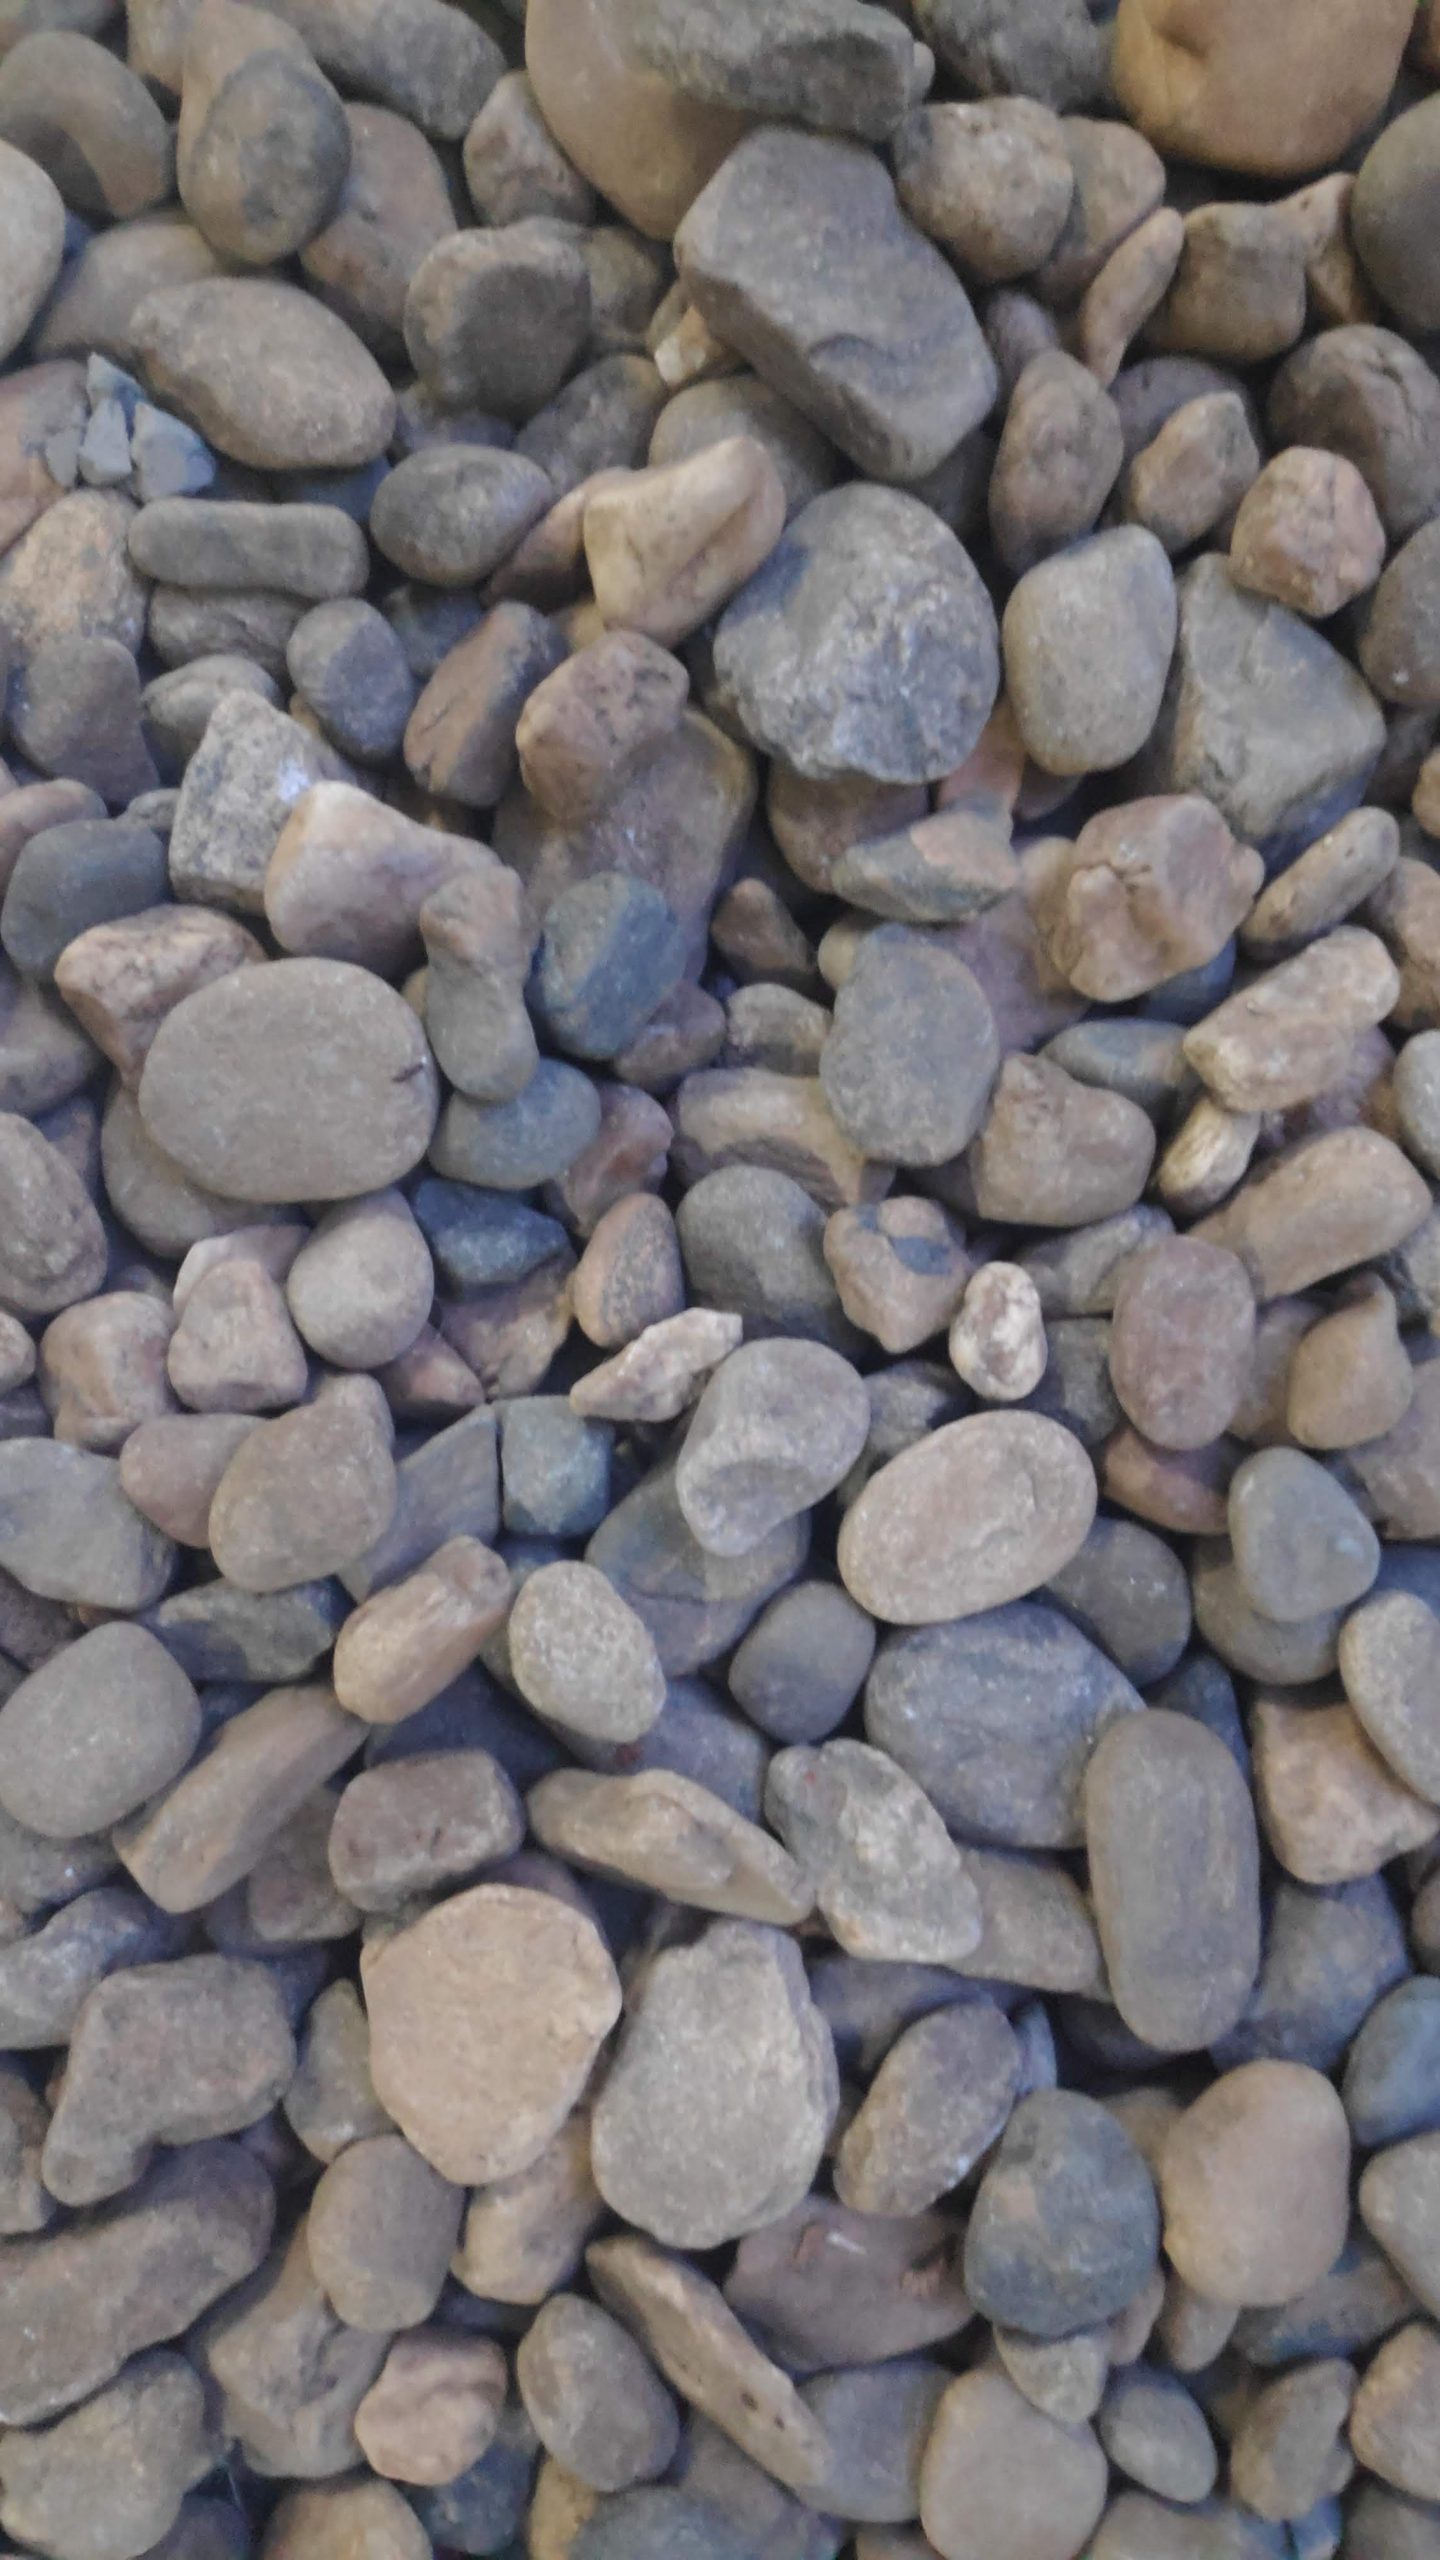 Stones and pebbles